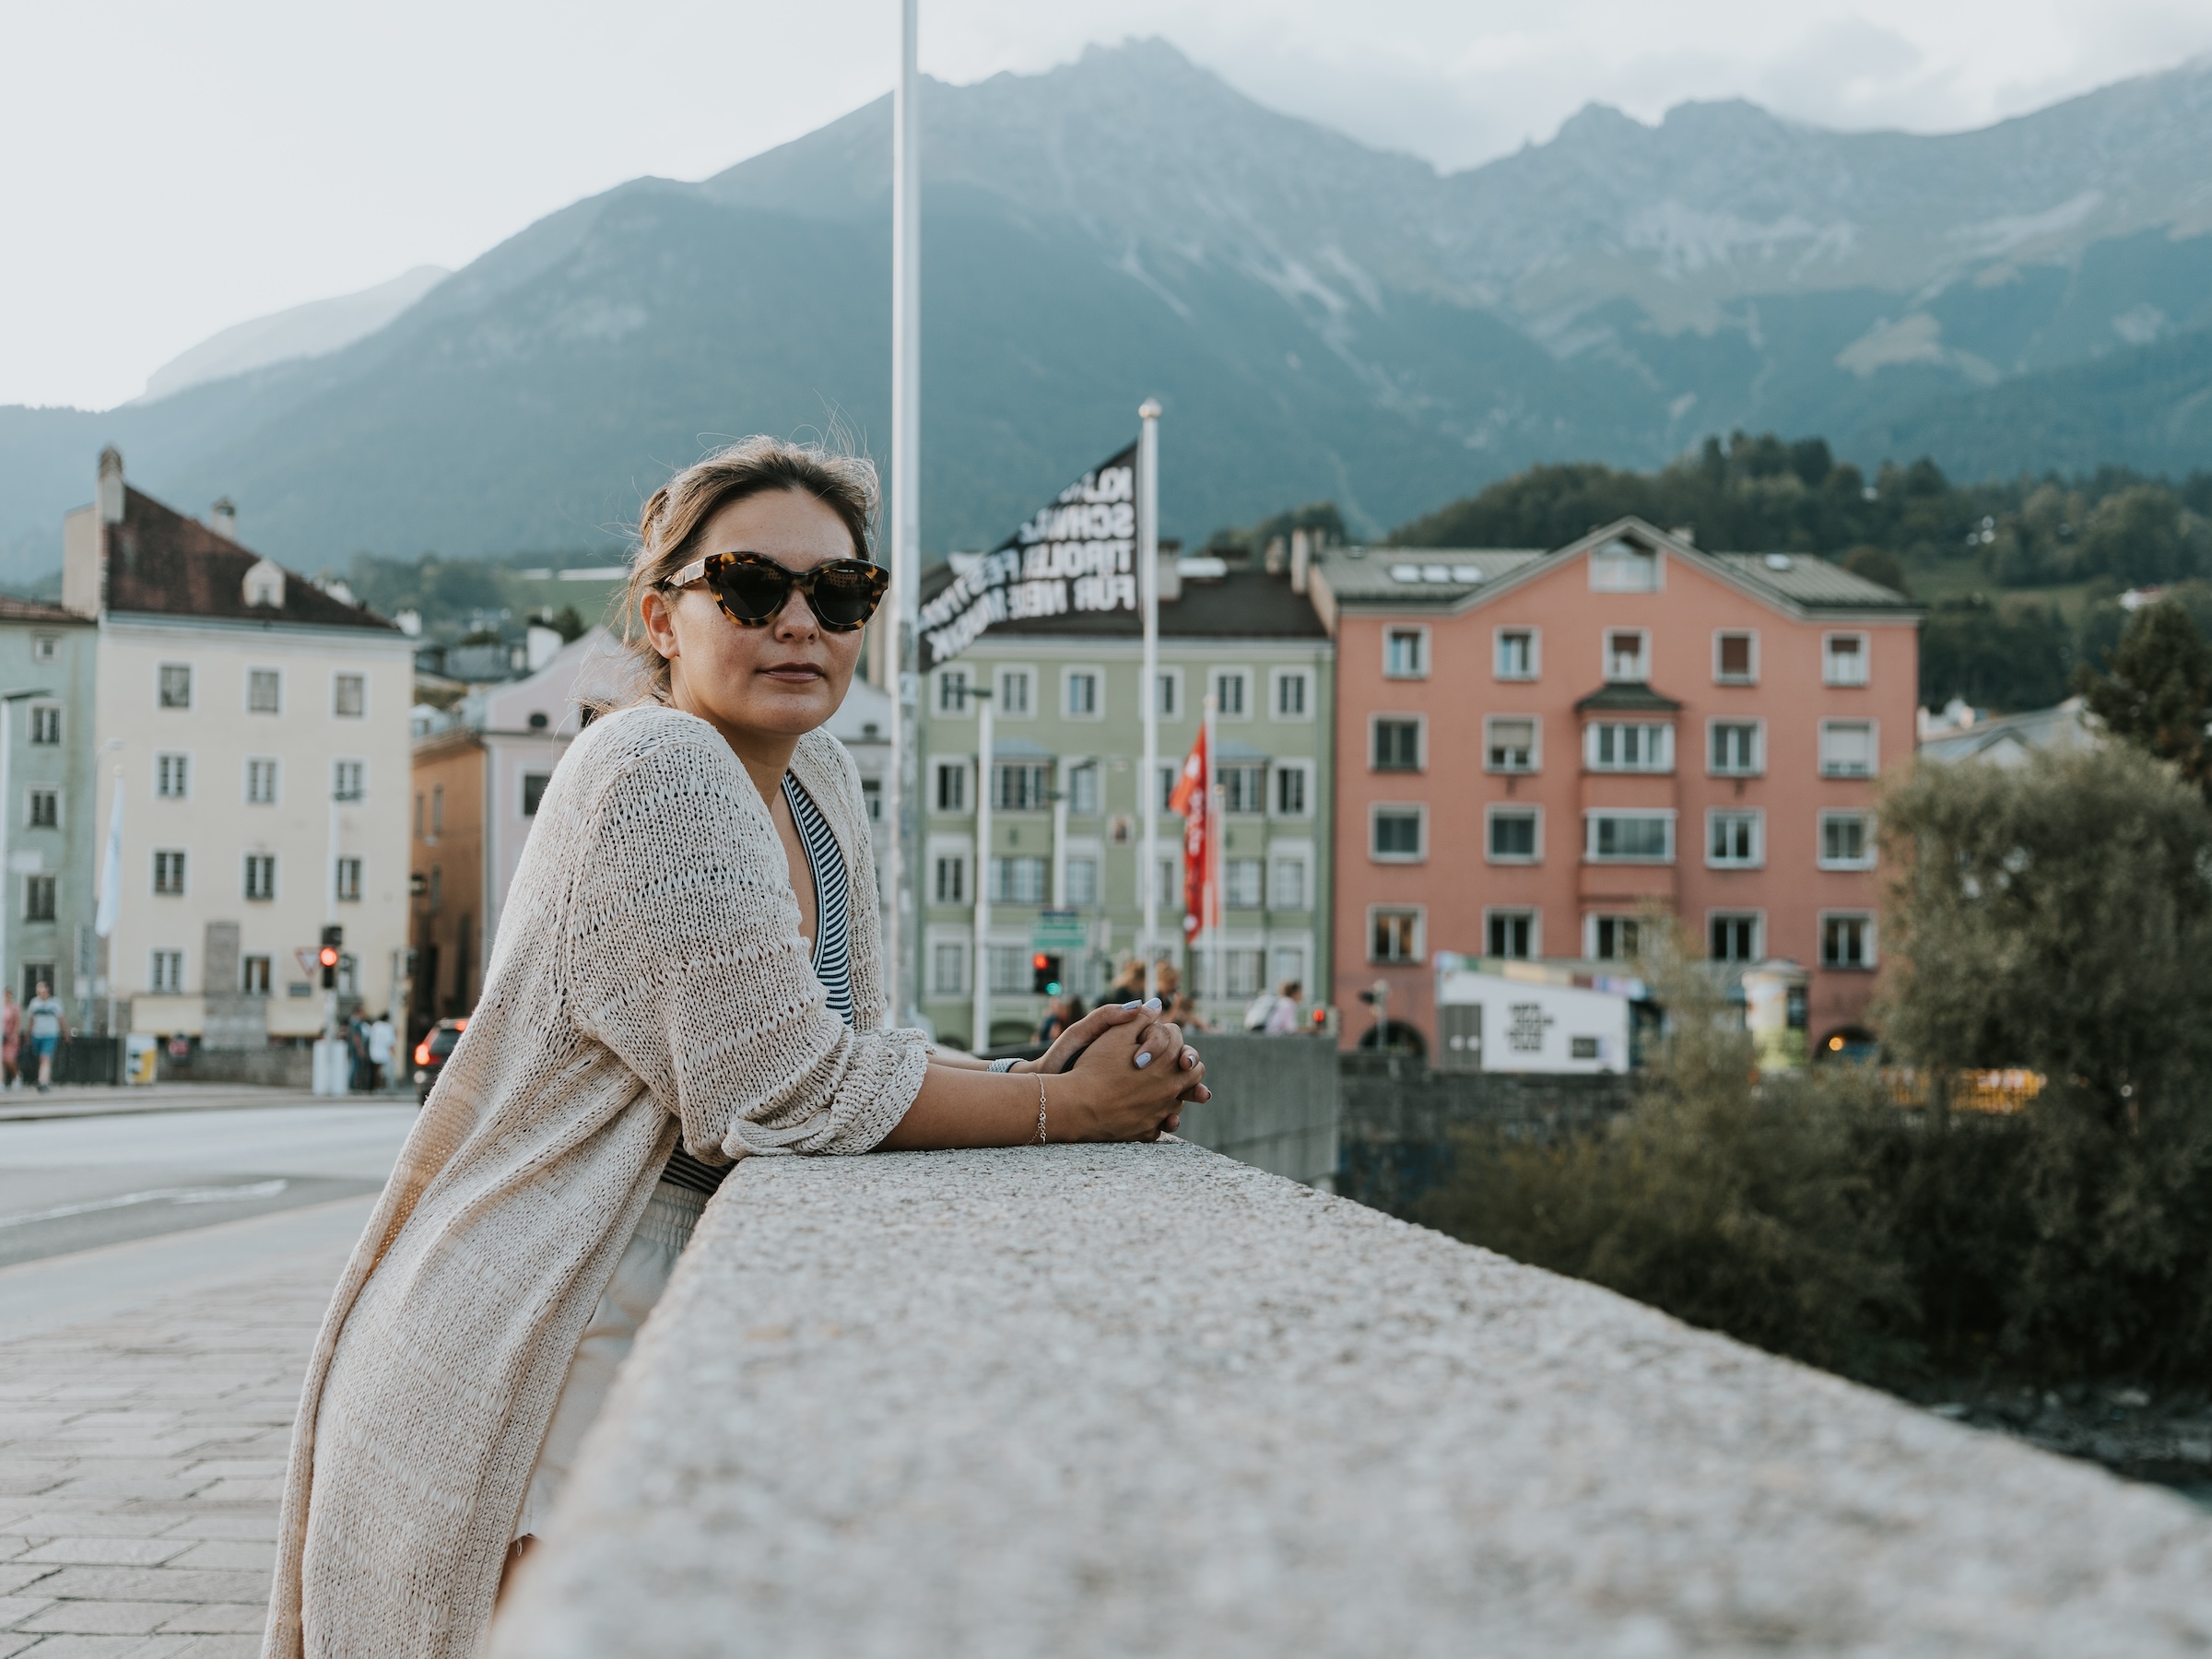 Standing in front of the colorful architecture and alpine mountains of Innsbruck